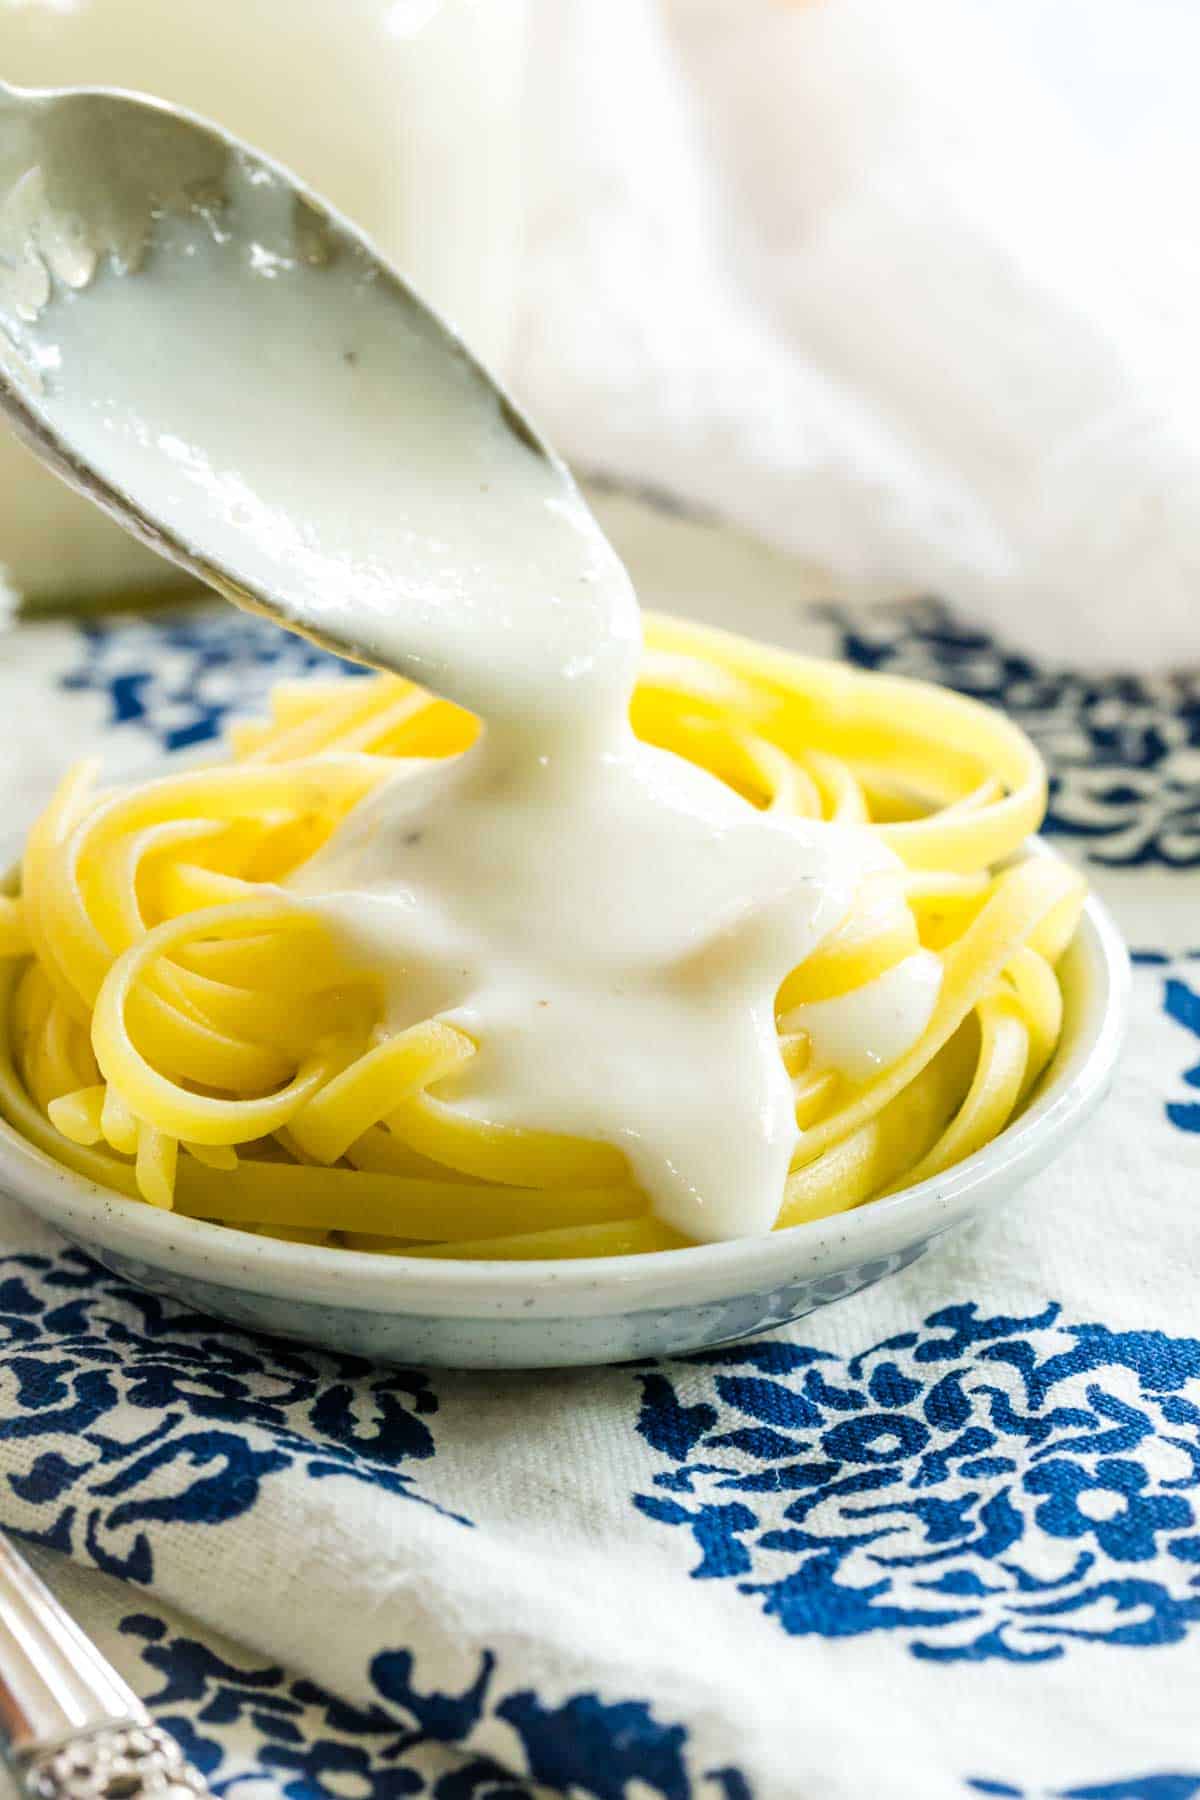 Homemade alfredo sauce is added to fettuccine with a spoon.